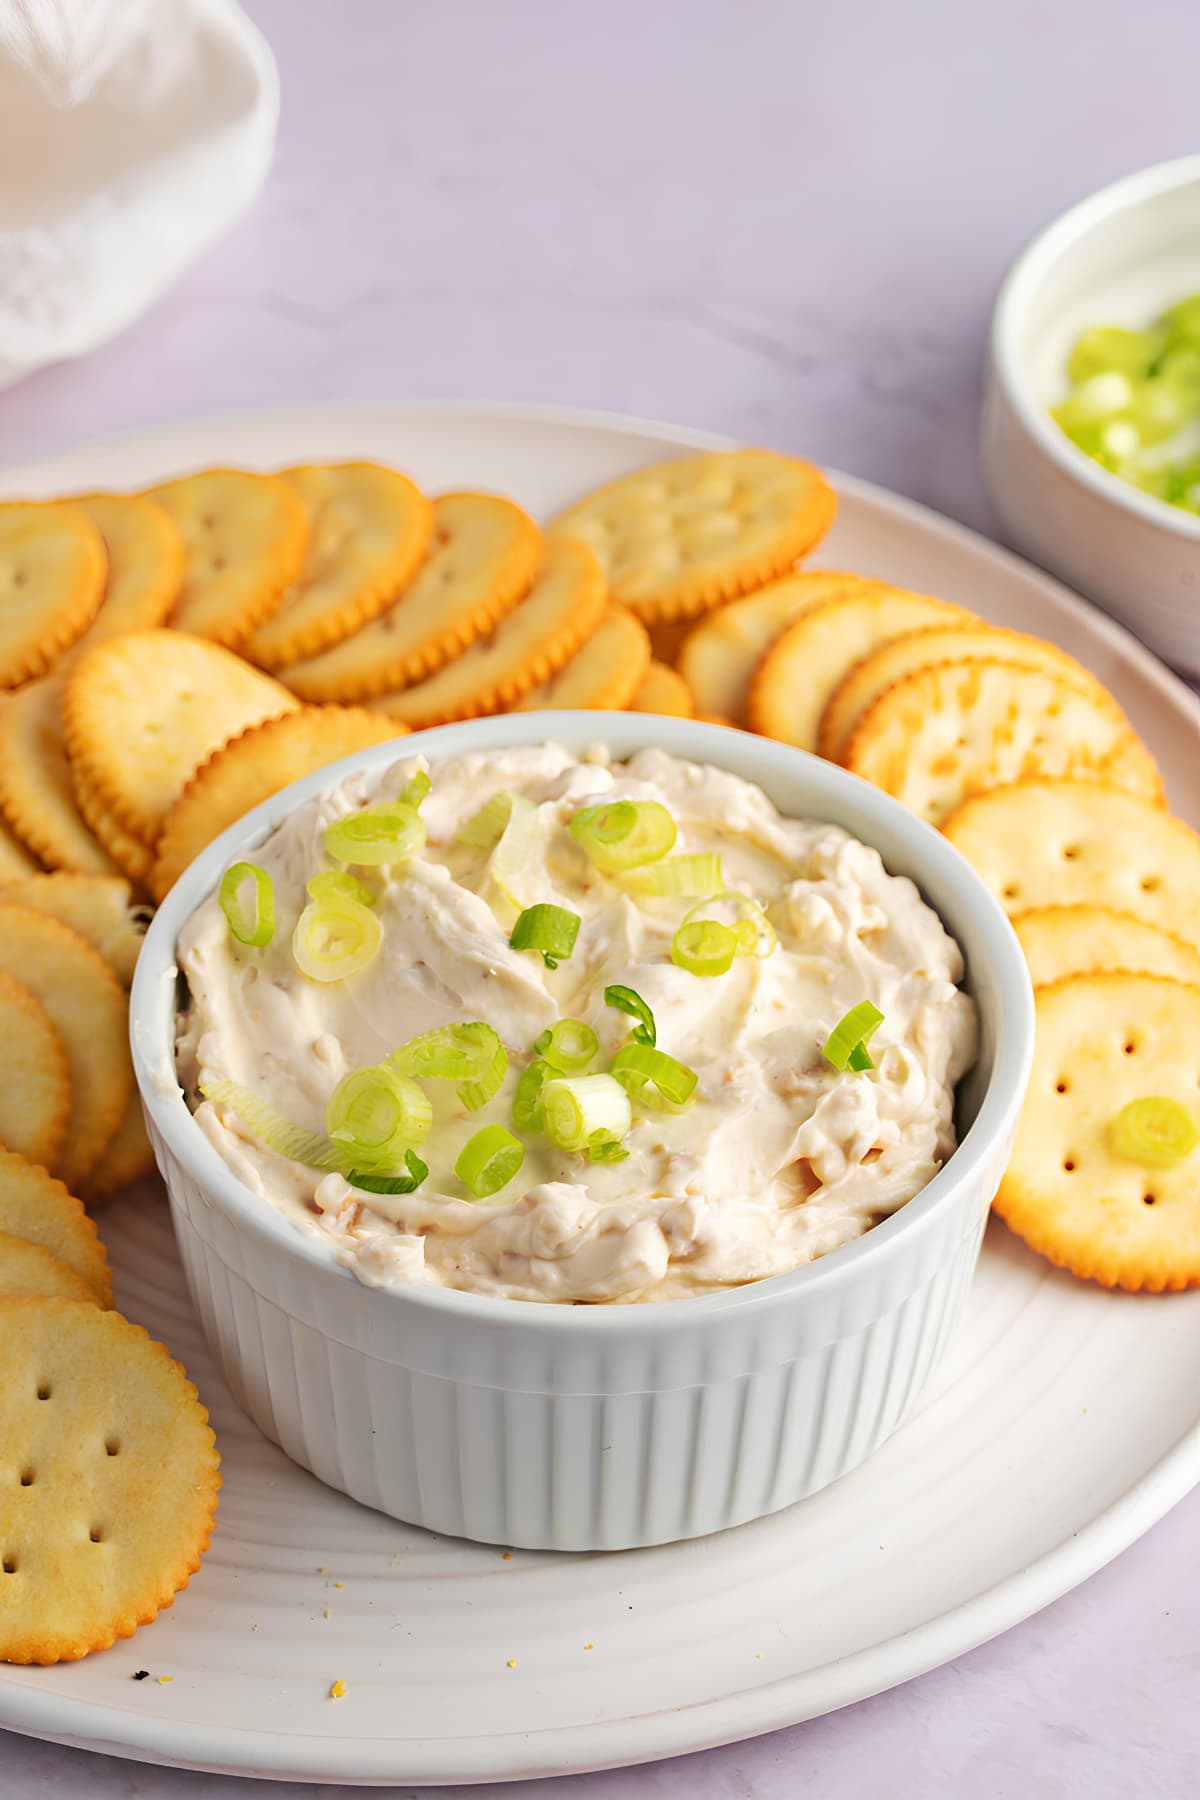 Homemade Clam Dip Topped with Onions Served with Biscuits